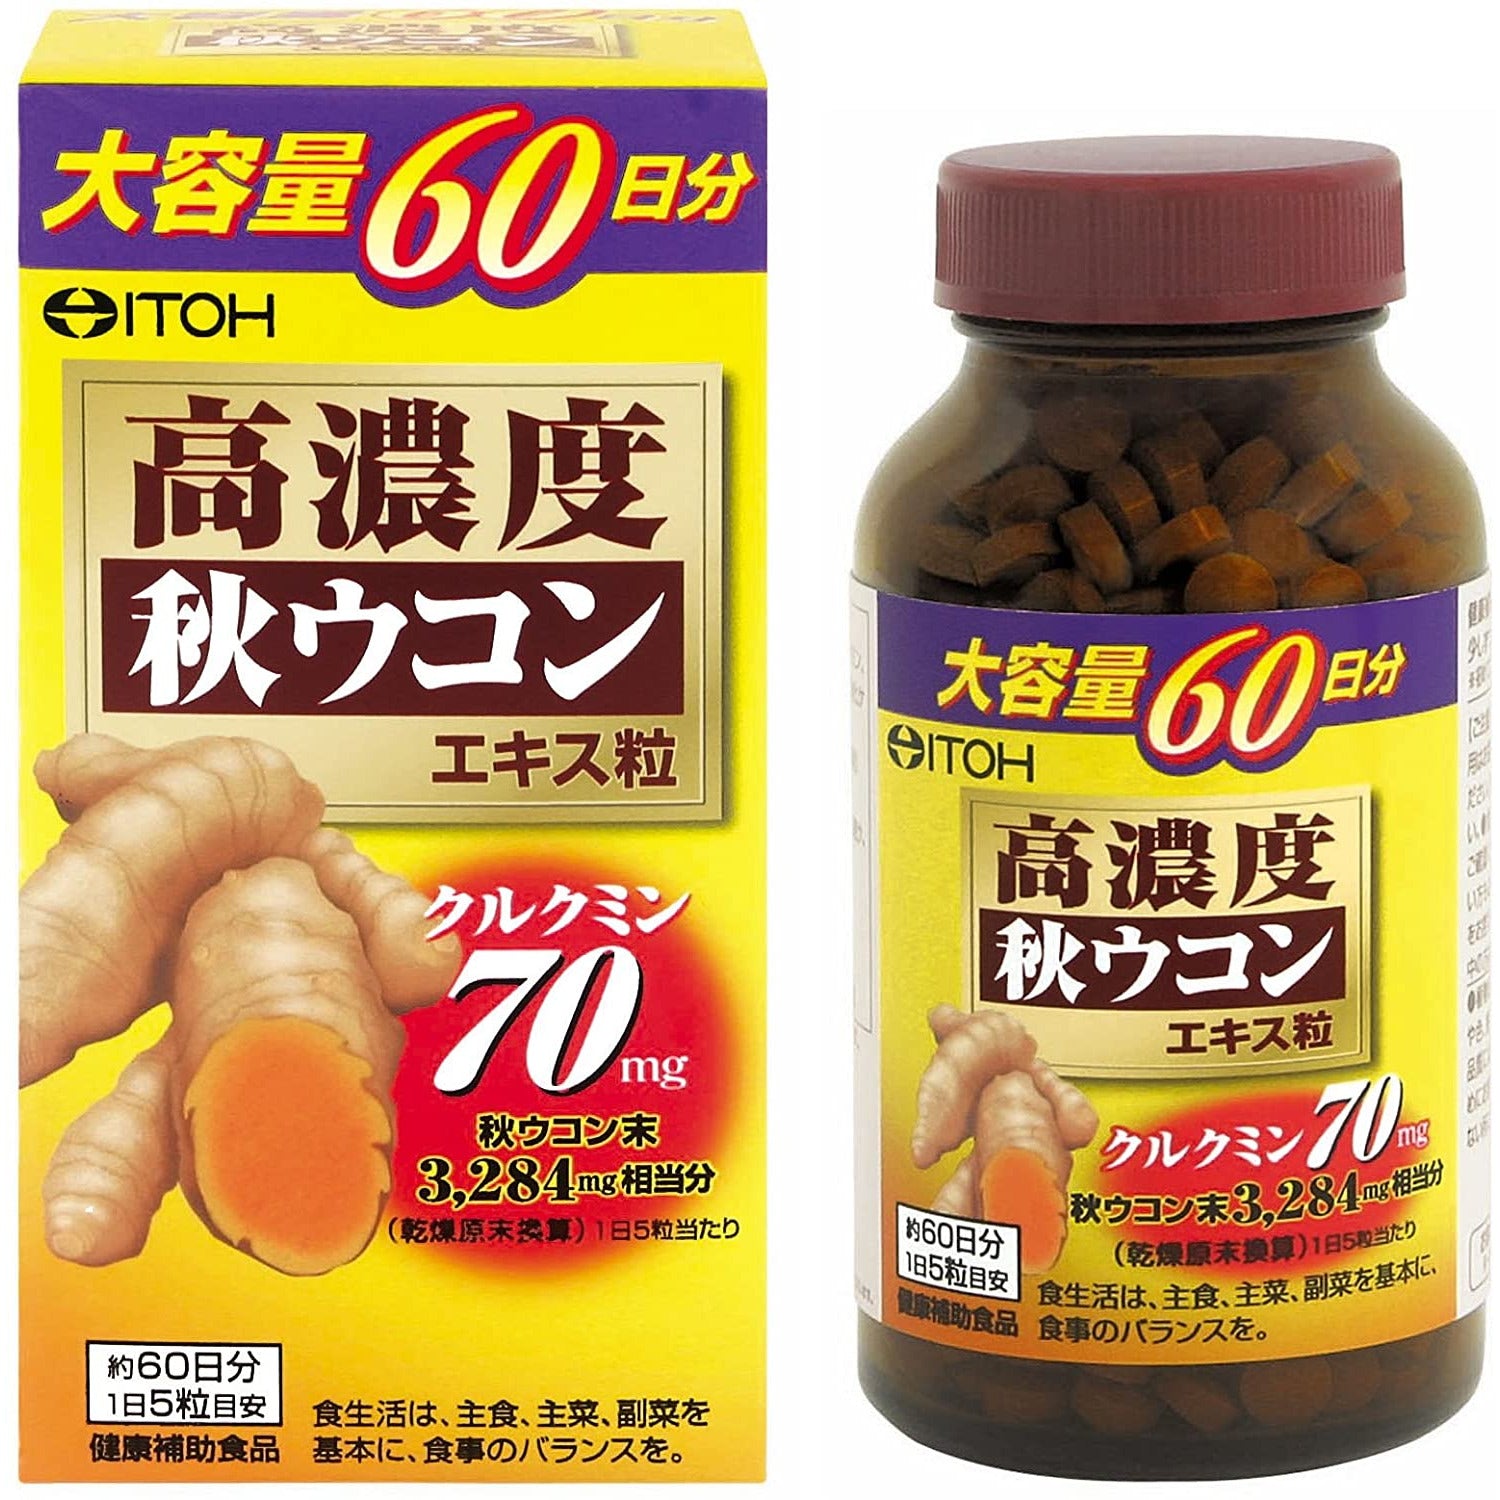 ITOH Kampo Pharmaceutical High Concentration Autumn Turmeric Extract Granules / 60 days 300 tablets